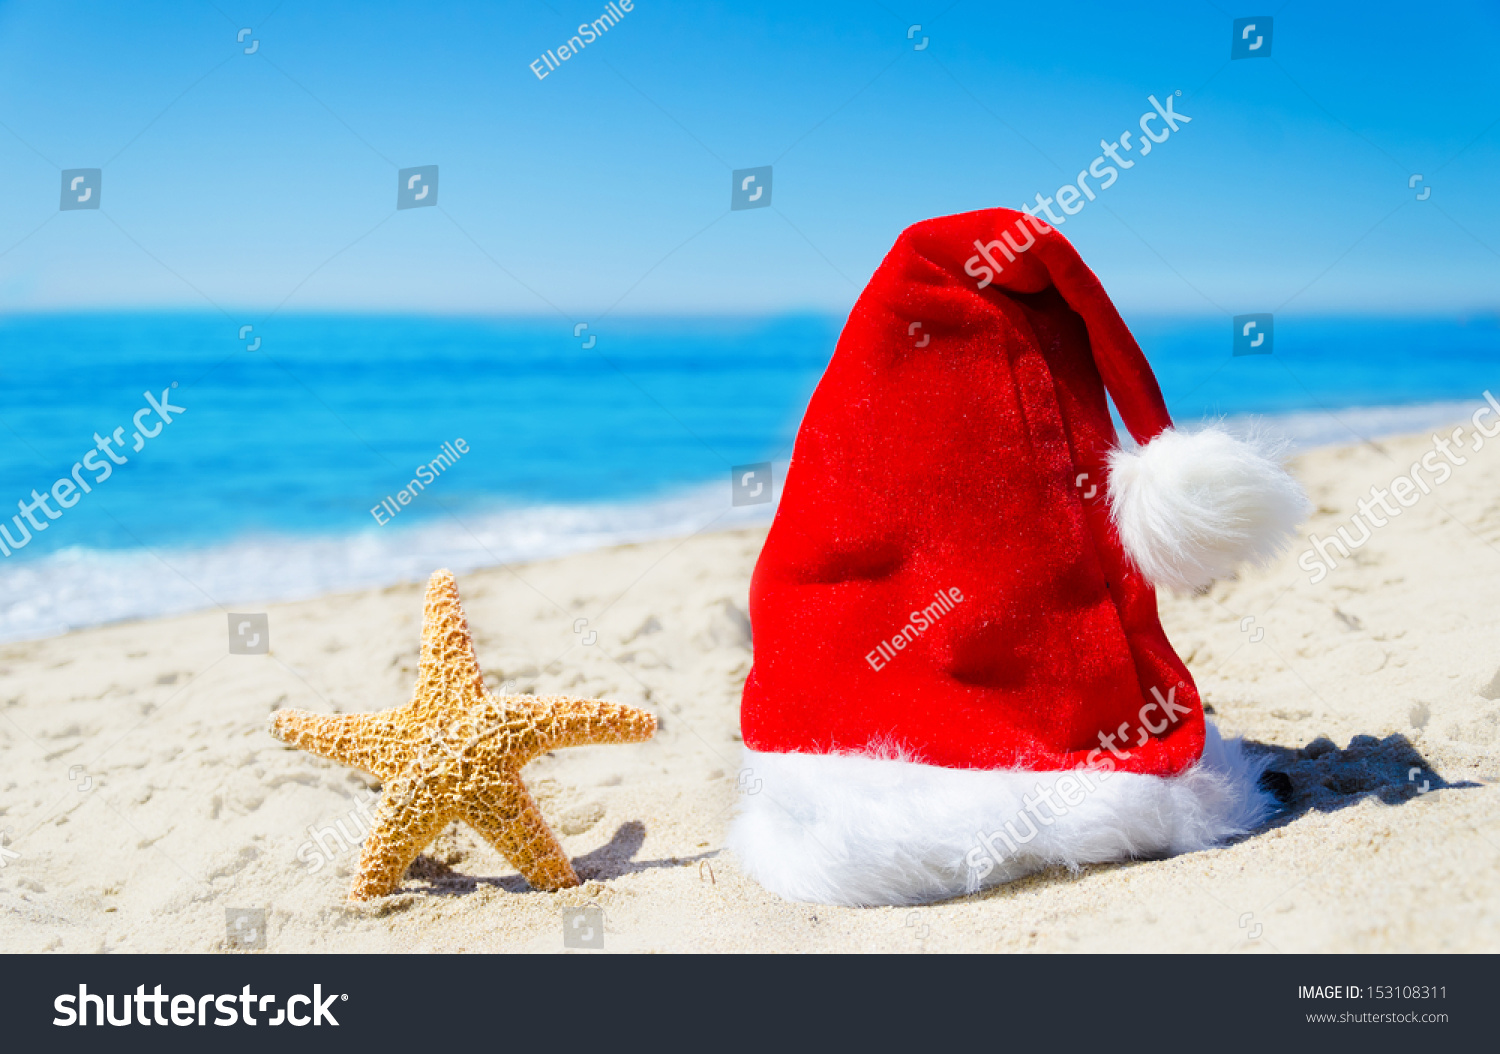 Close up Santa hat with starfish on the beach by the ocean - Christmas and new year concept #153108311